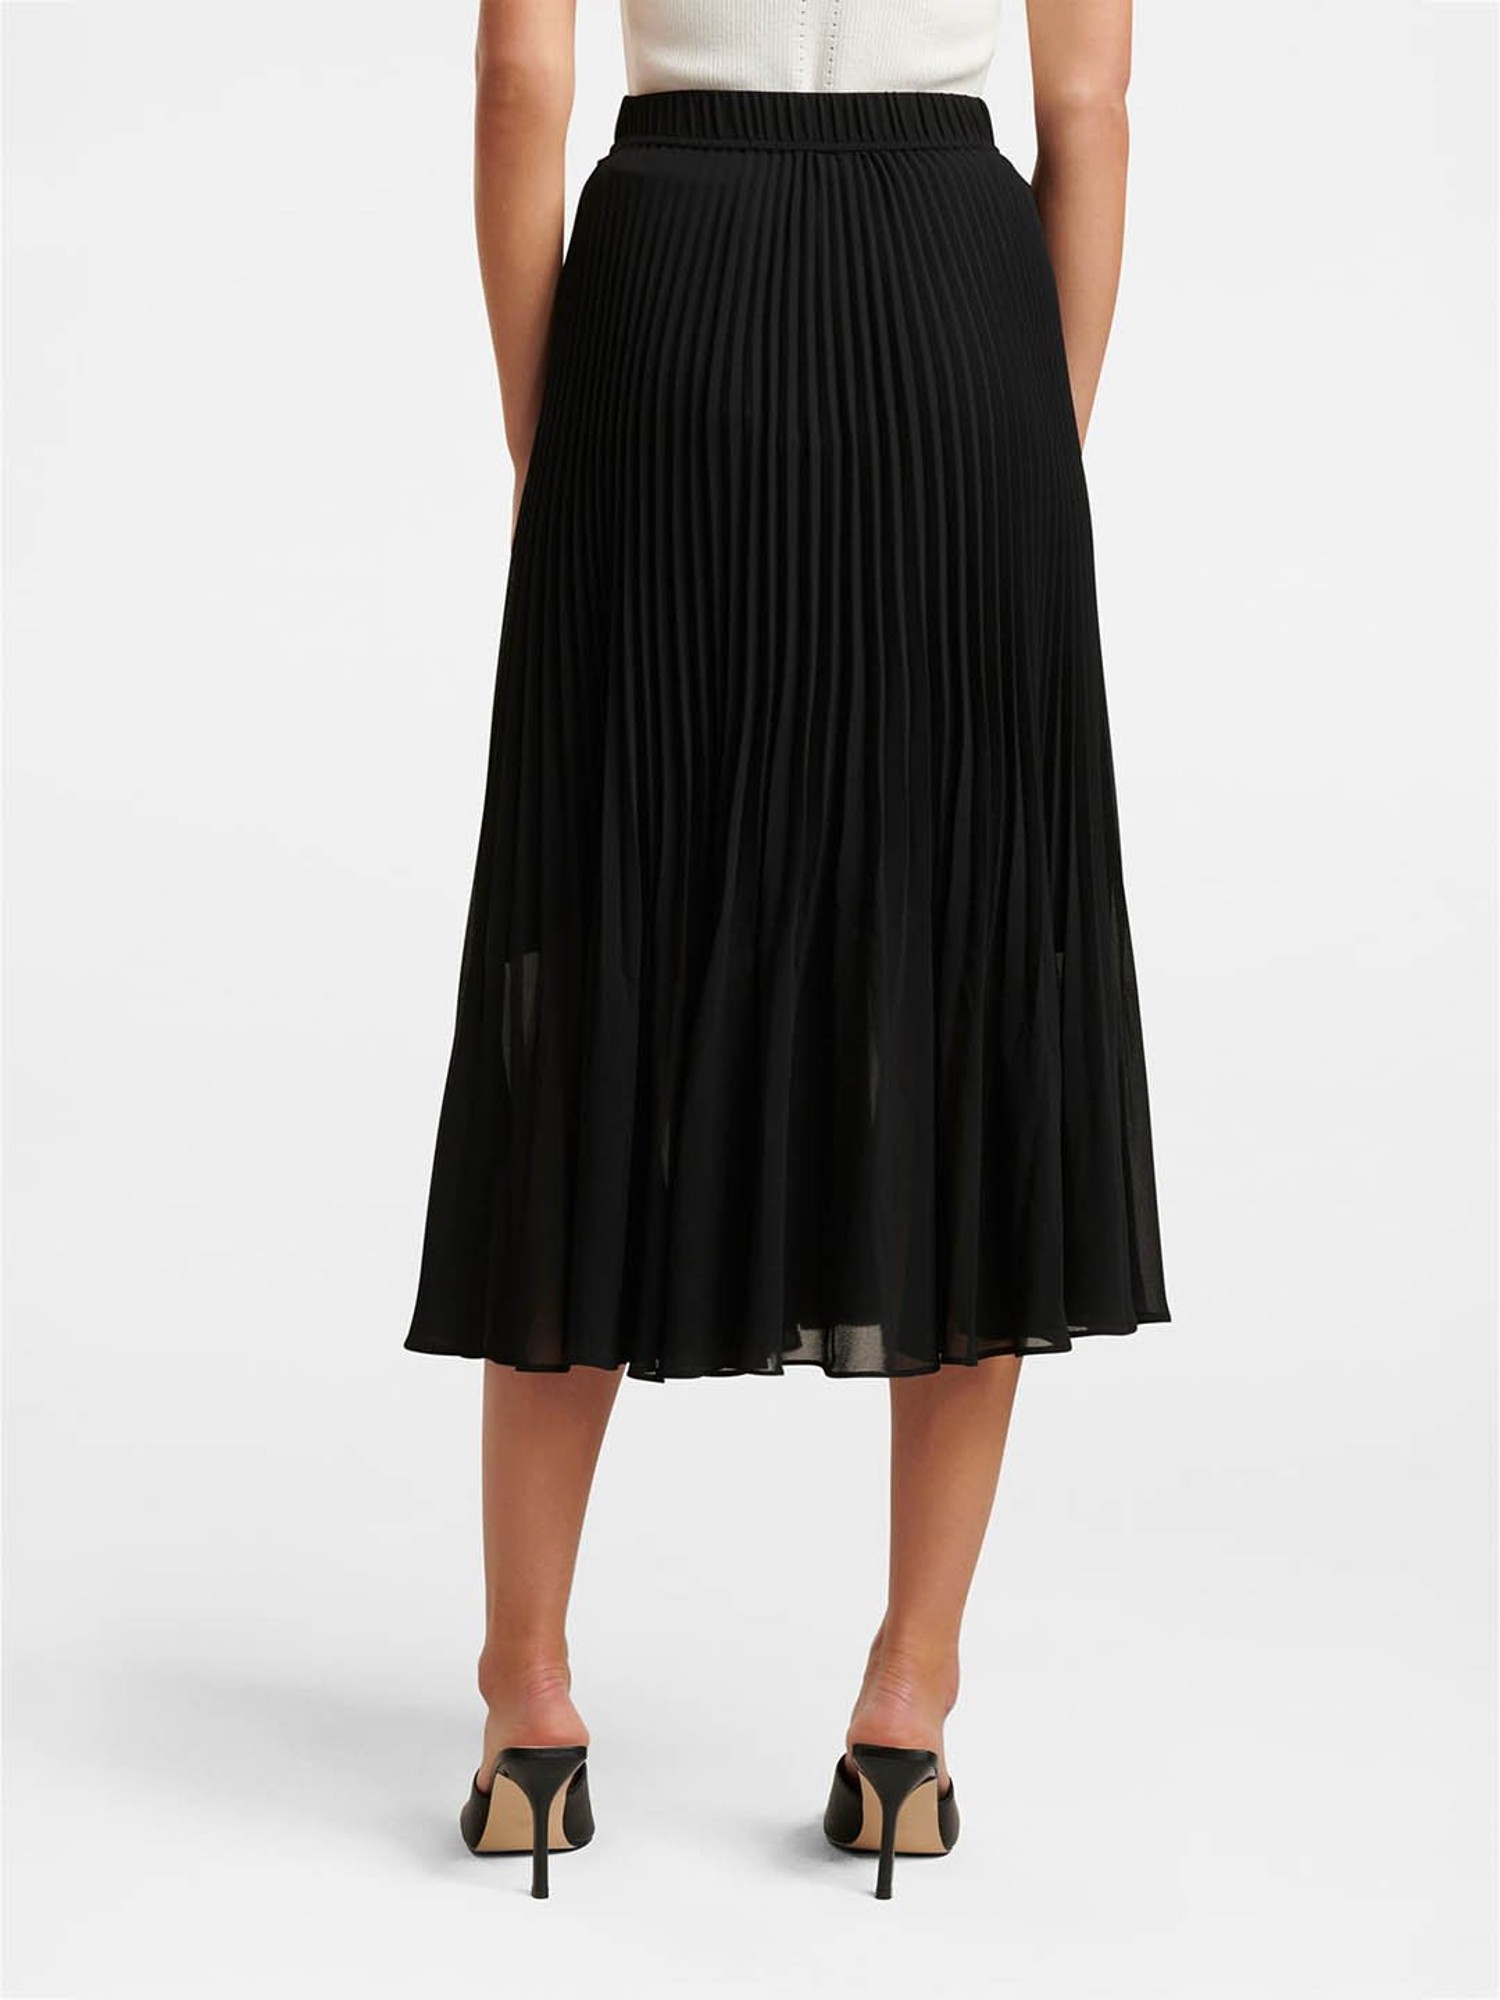 Metallic Pleated Maxi Skirts  Levency  Skirt and sneakers Pleated skirt  outfit How to style a pleated skirt